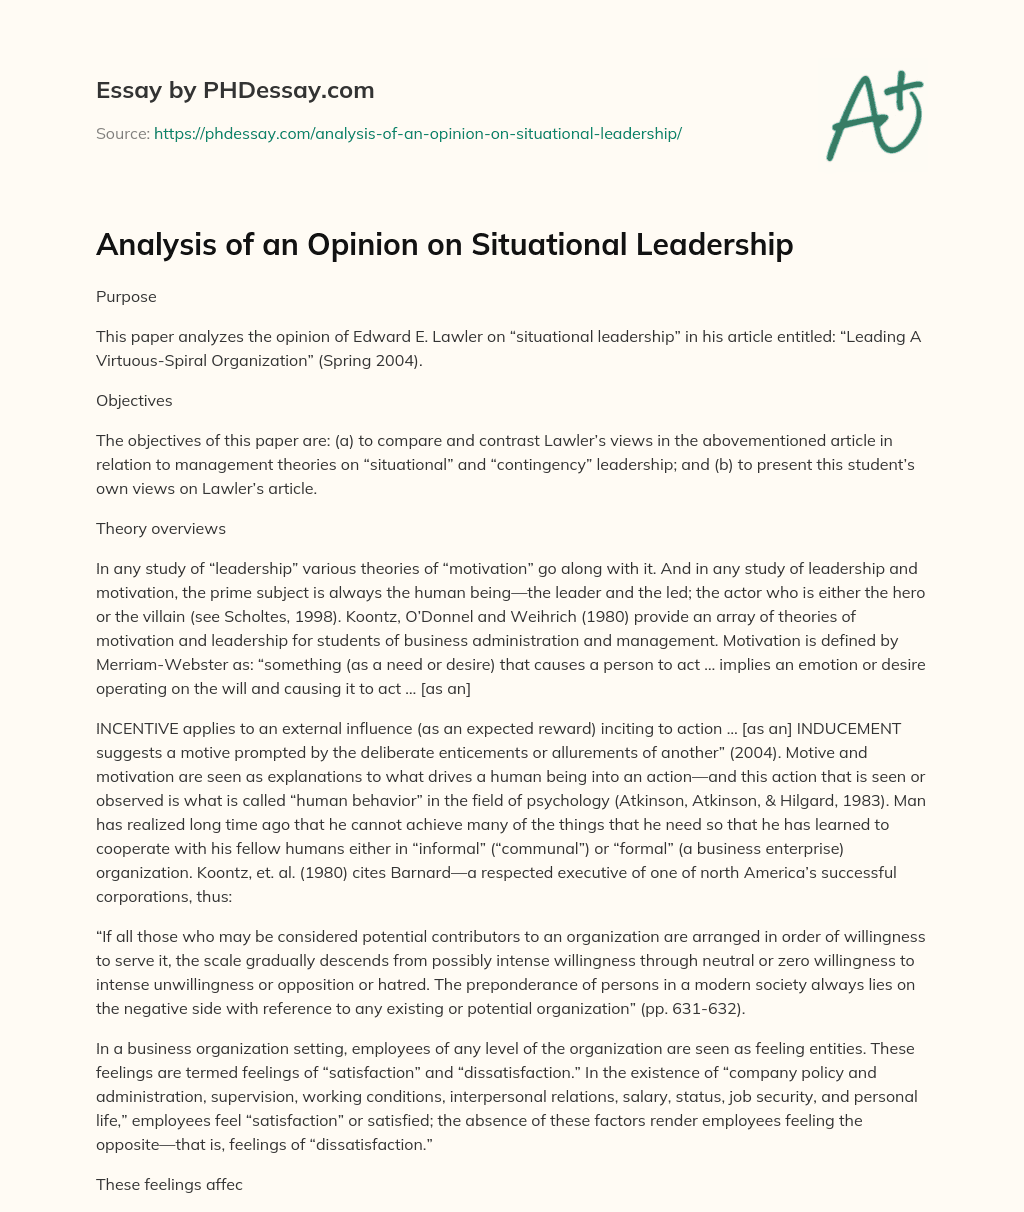 Analysis of an Opinion on Situational Leadership essay